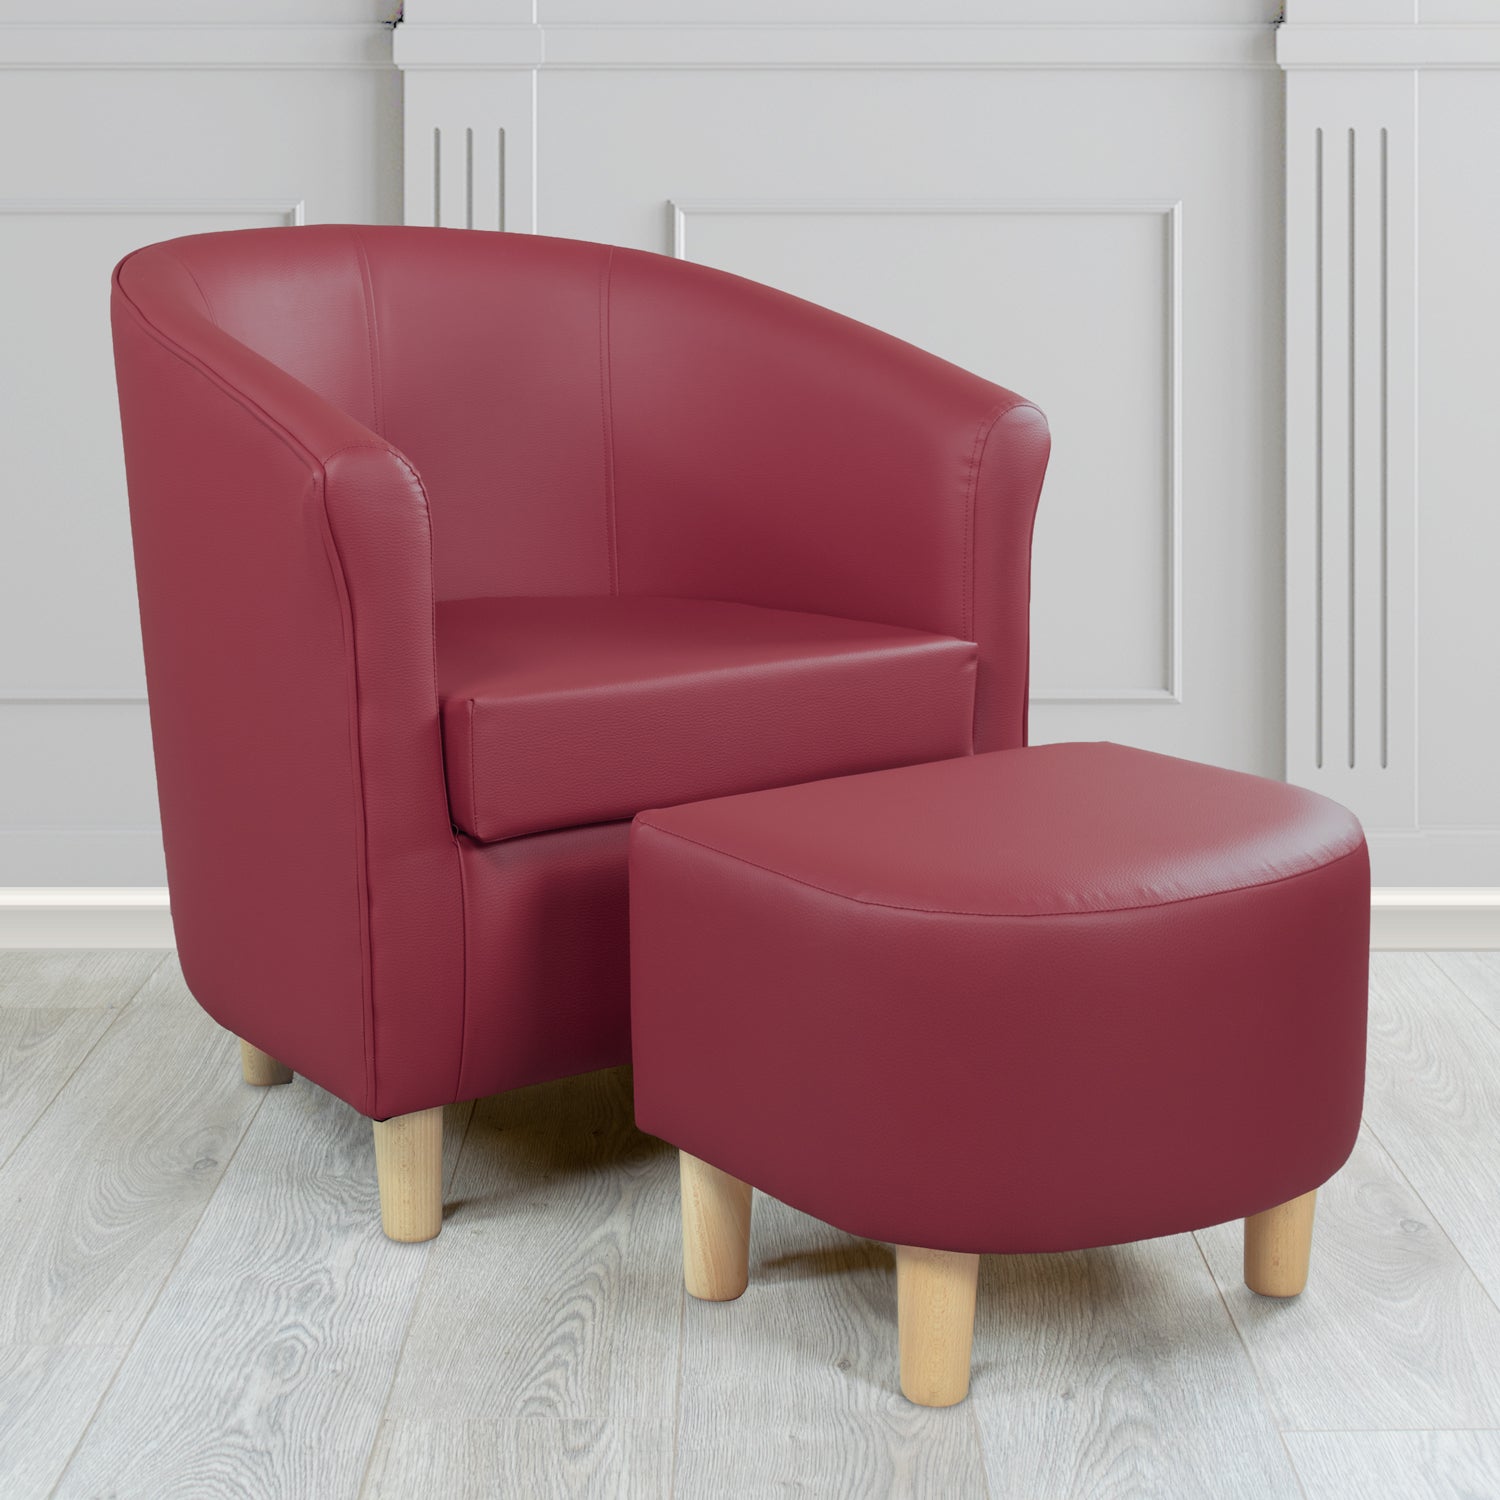 Tuscany Just Colour Jazzberry Faux Leather Tub Chair with Dee Footstool Set - The Tub Chair Shop